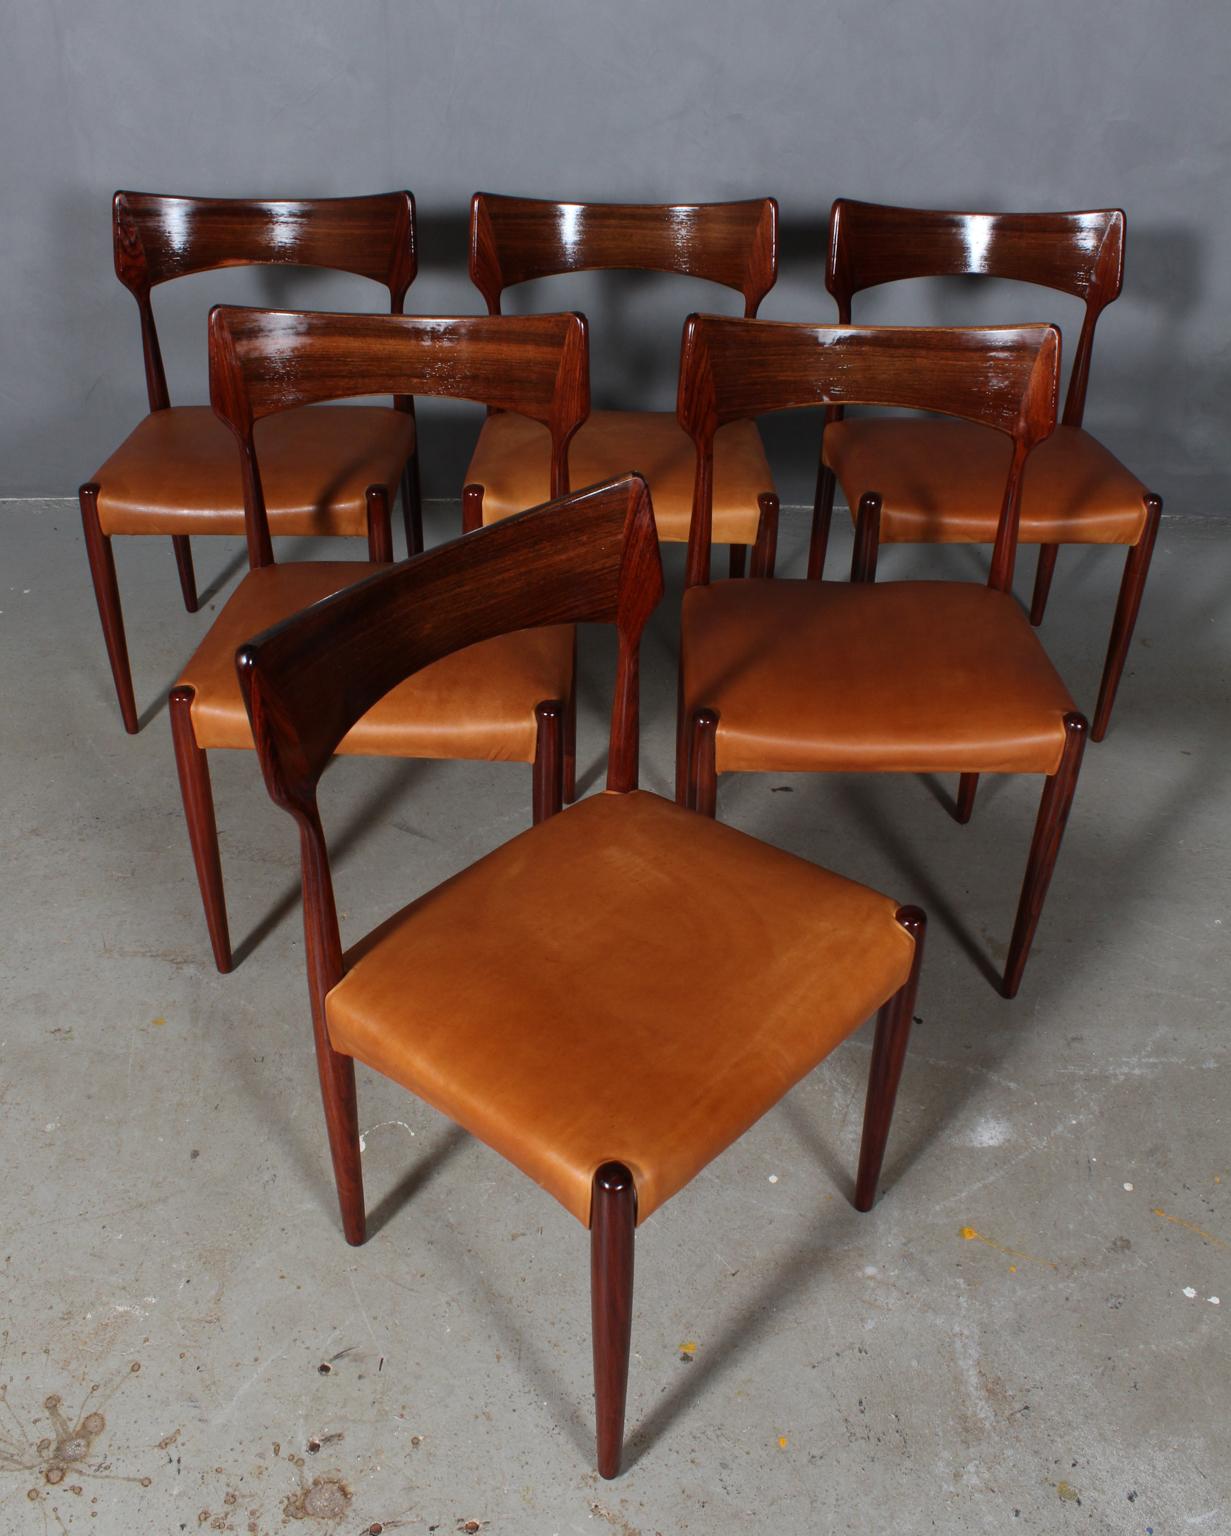 Bernhard Pedersen & Søn set of six dining chairs in partly solid rosewood.

New upholstered with vintage tan aniline leather.

Made in the 1960s.